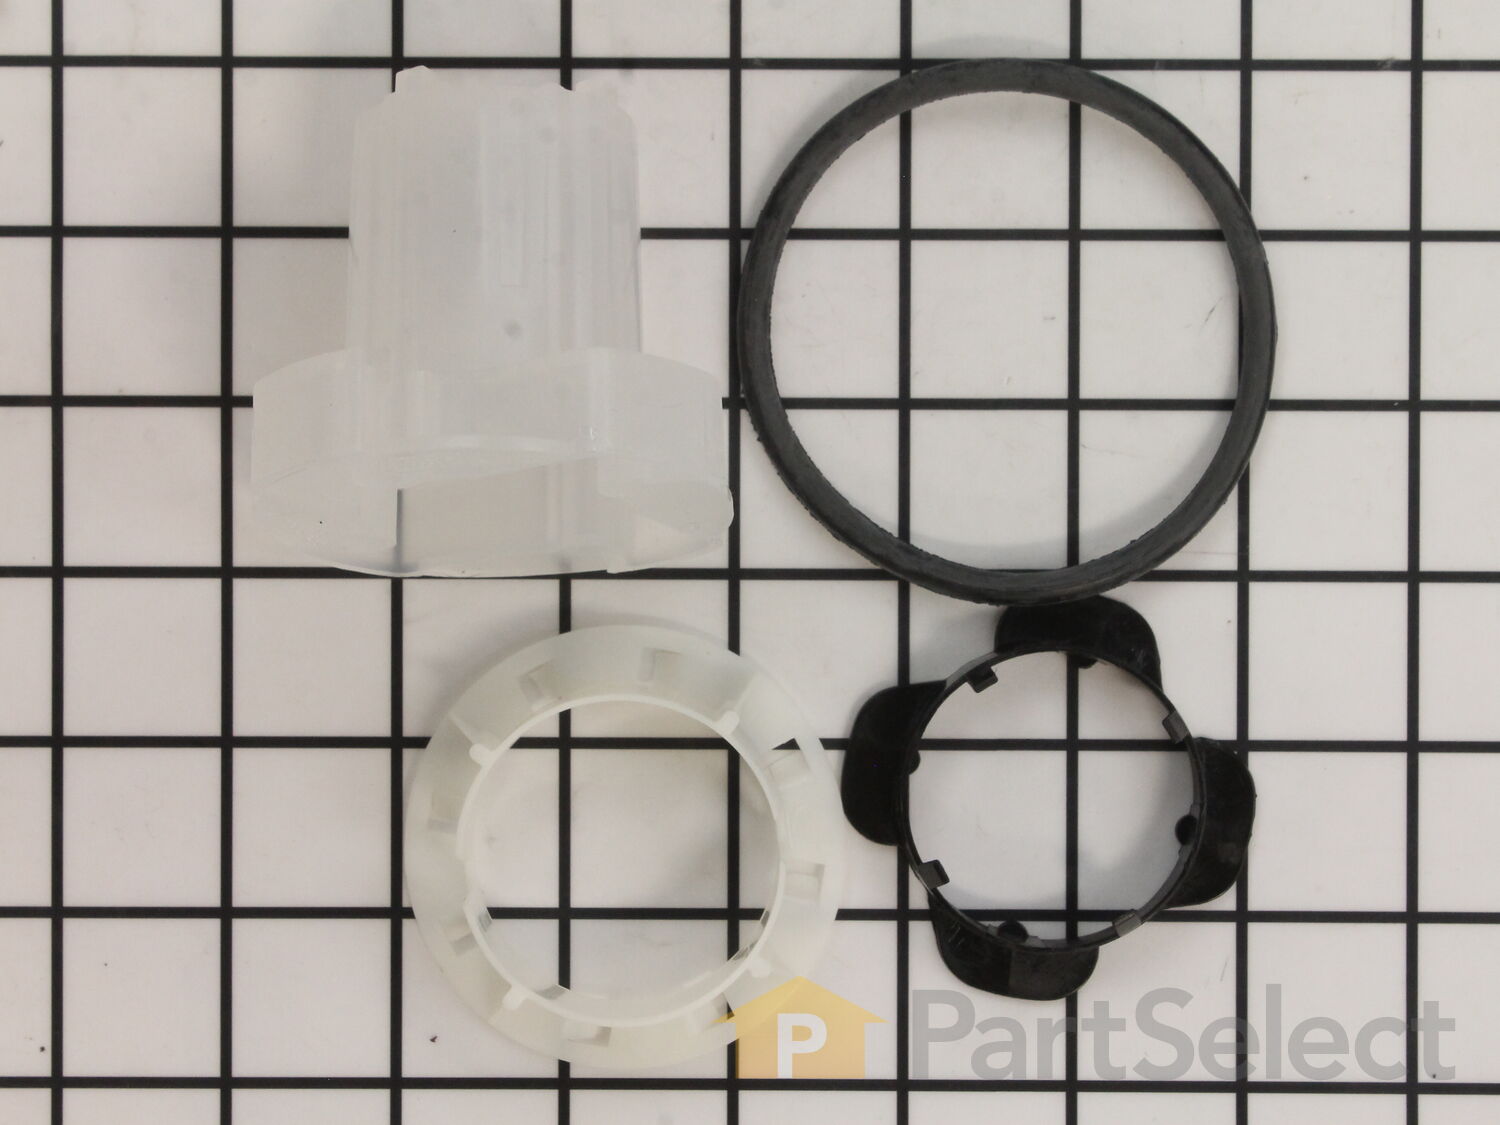 Details about   Belt Repair Kit for Whirlpool 1-8 AED AGD CED/M CGD/M EED EGD GCE GCG GEQ Series 